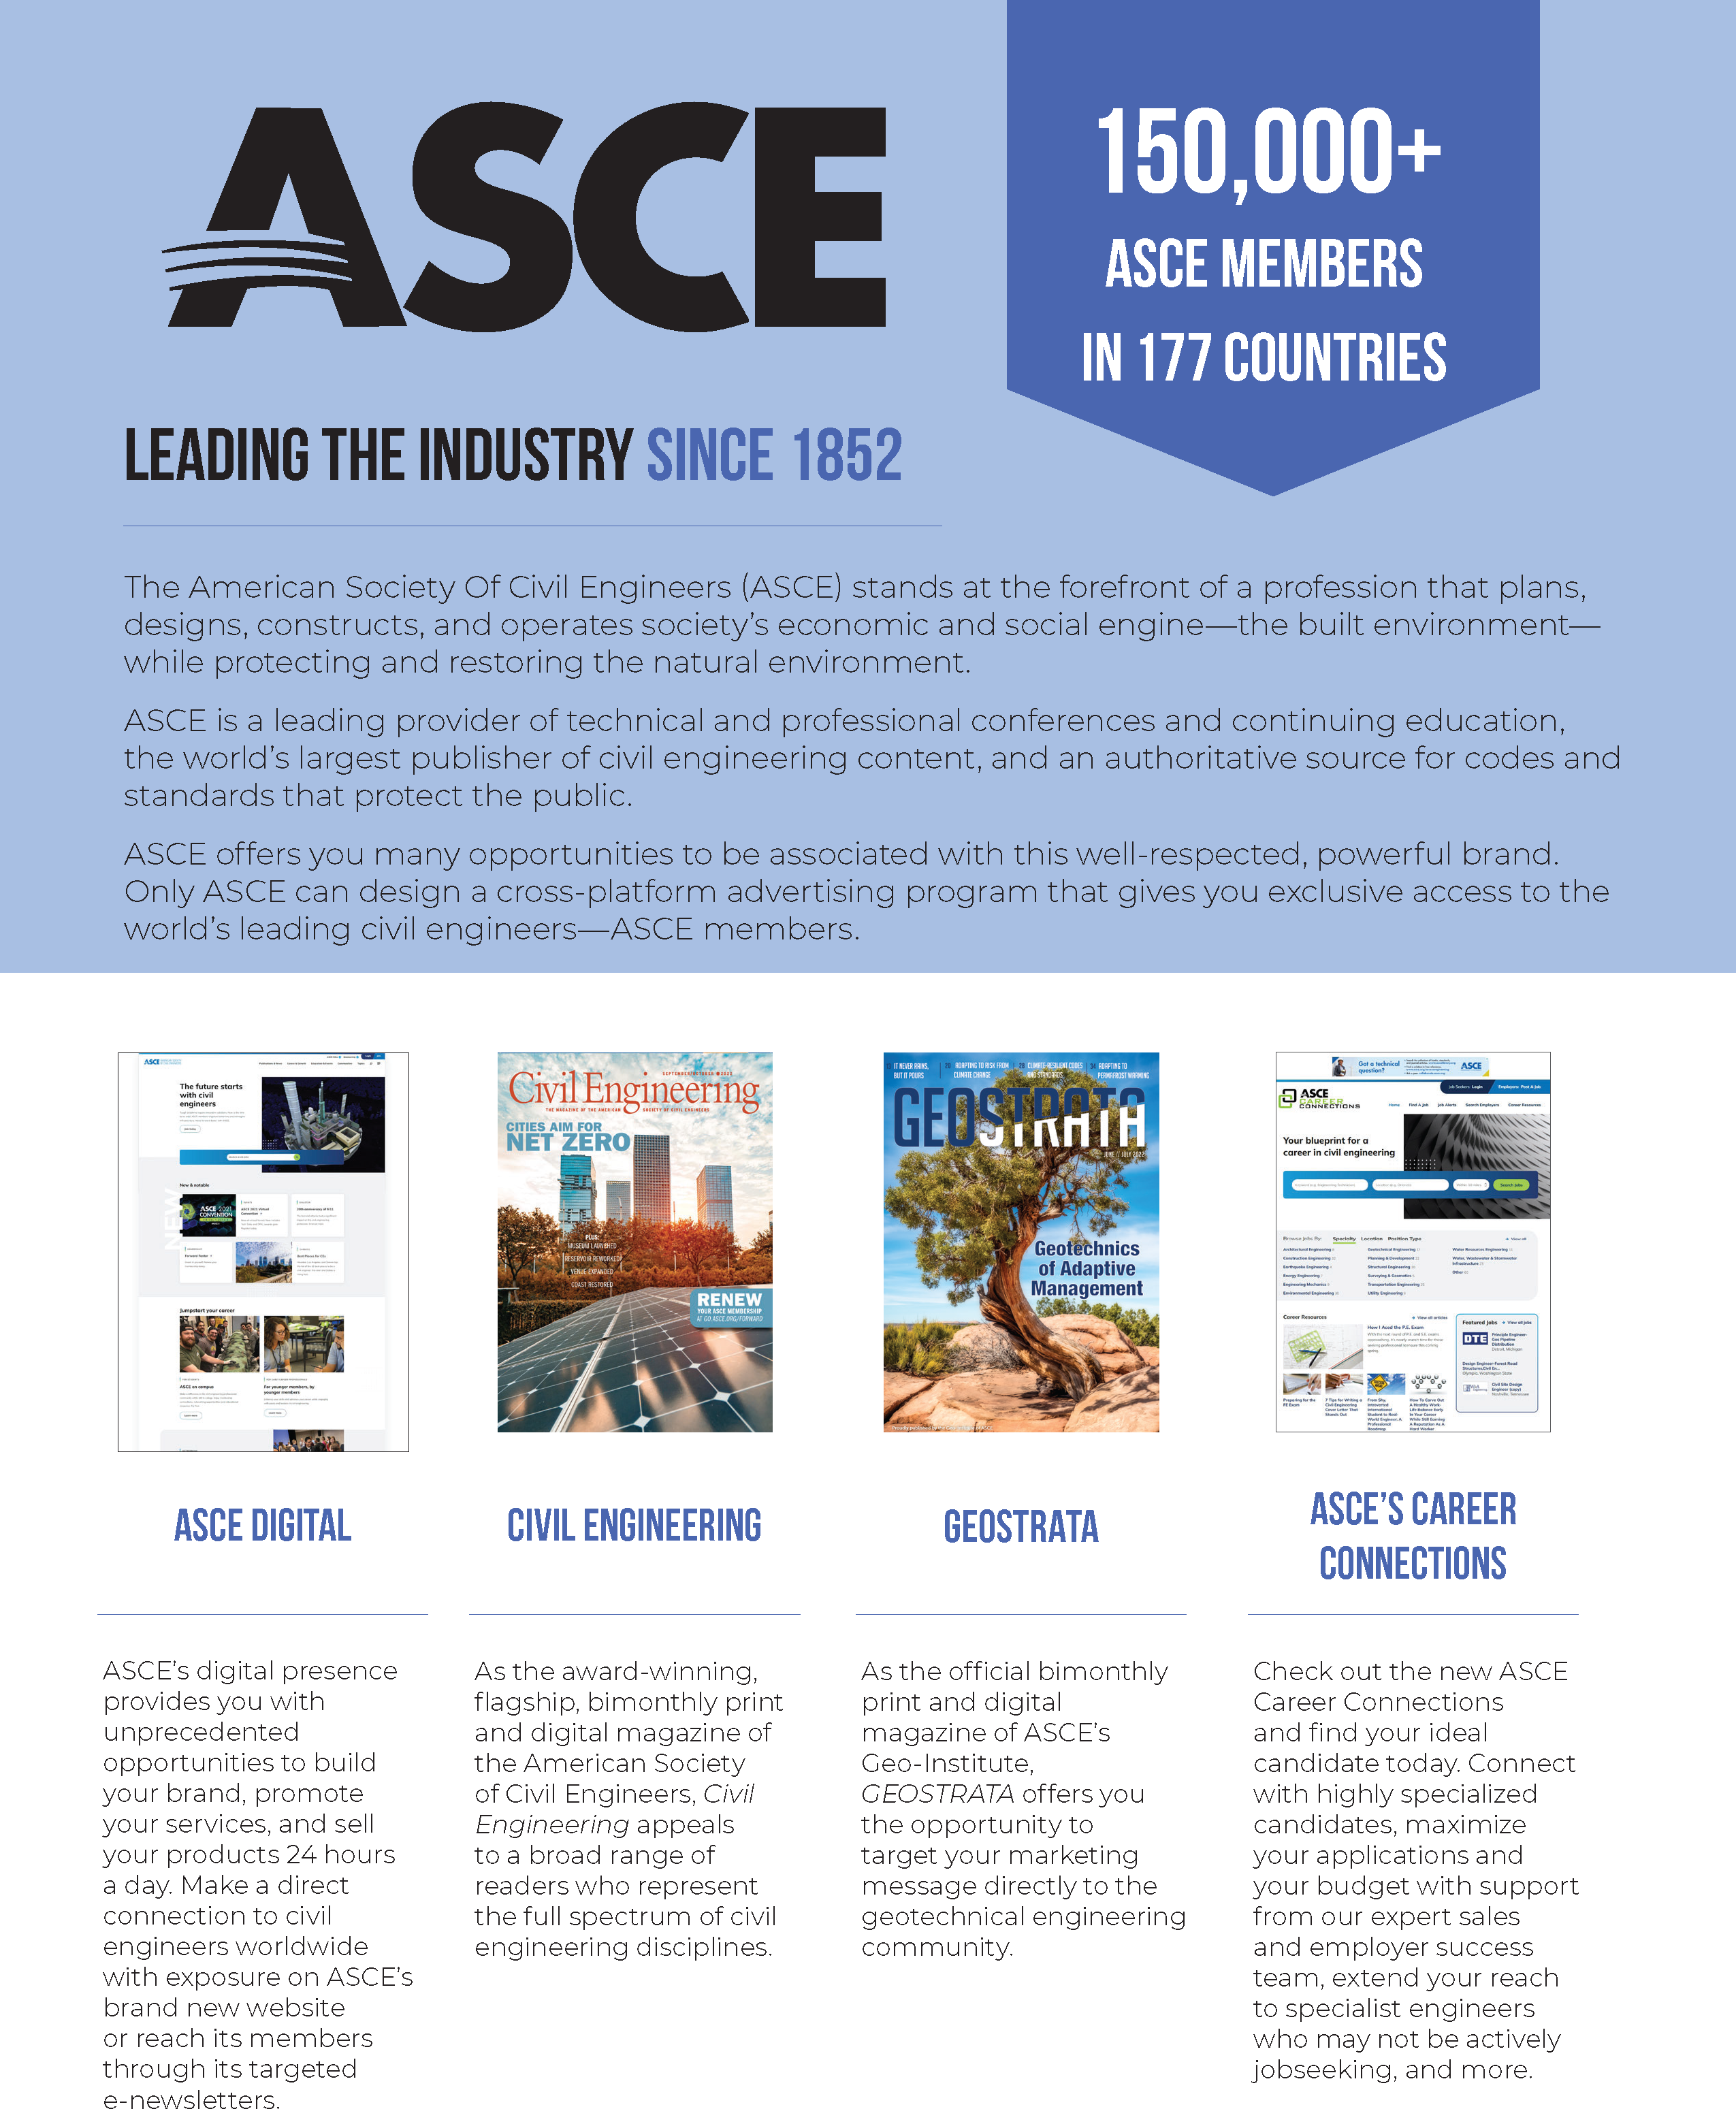 About ASCE